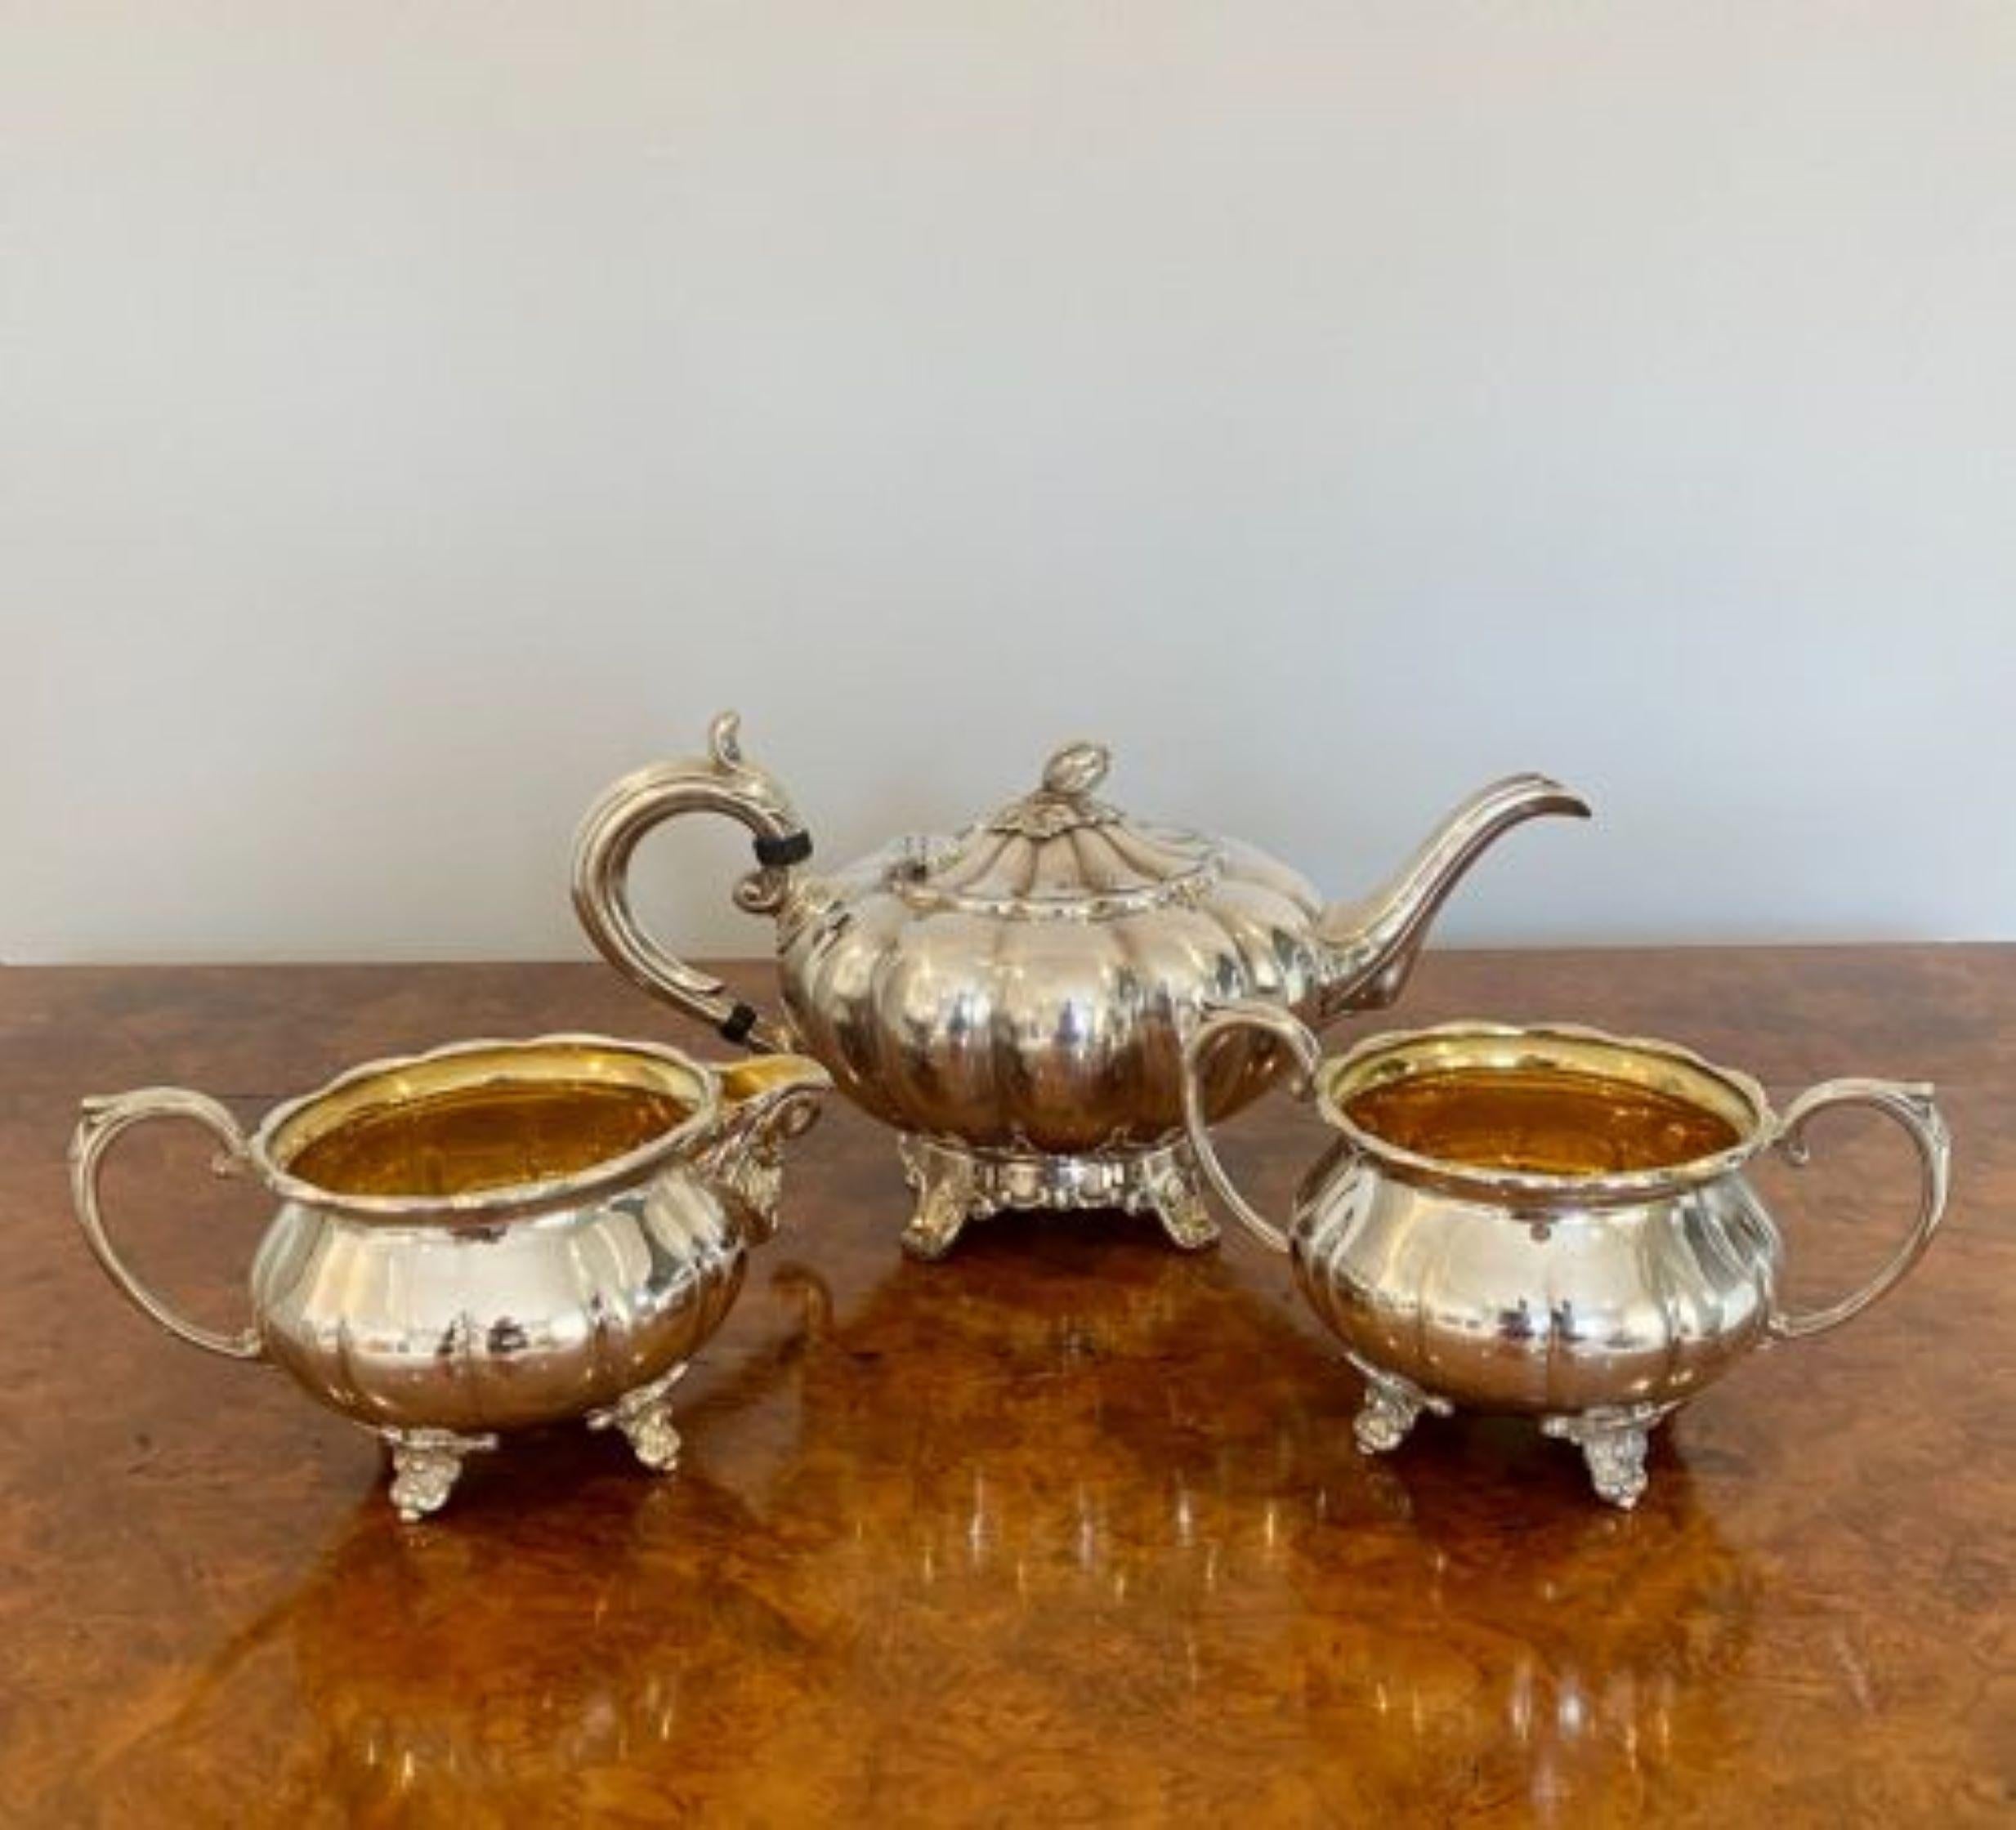 Antique Edwardian quality silver plated three piece tea set.
Quality silver plated tea set in the shape of a melon raised on ornate feet.